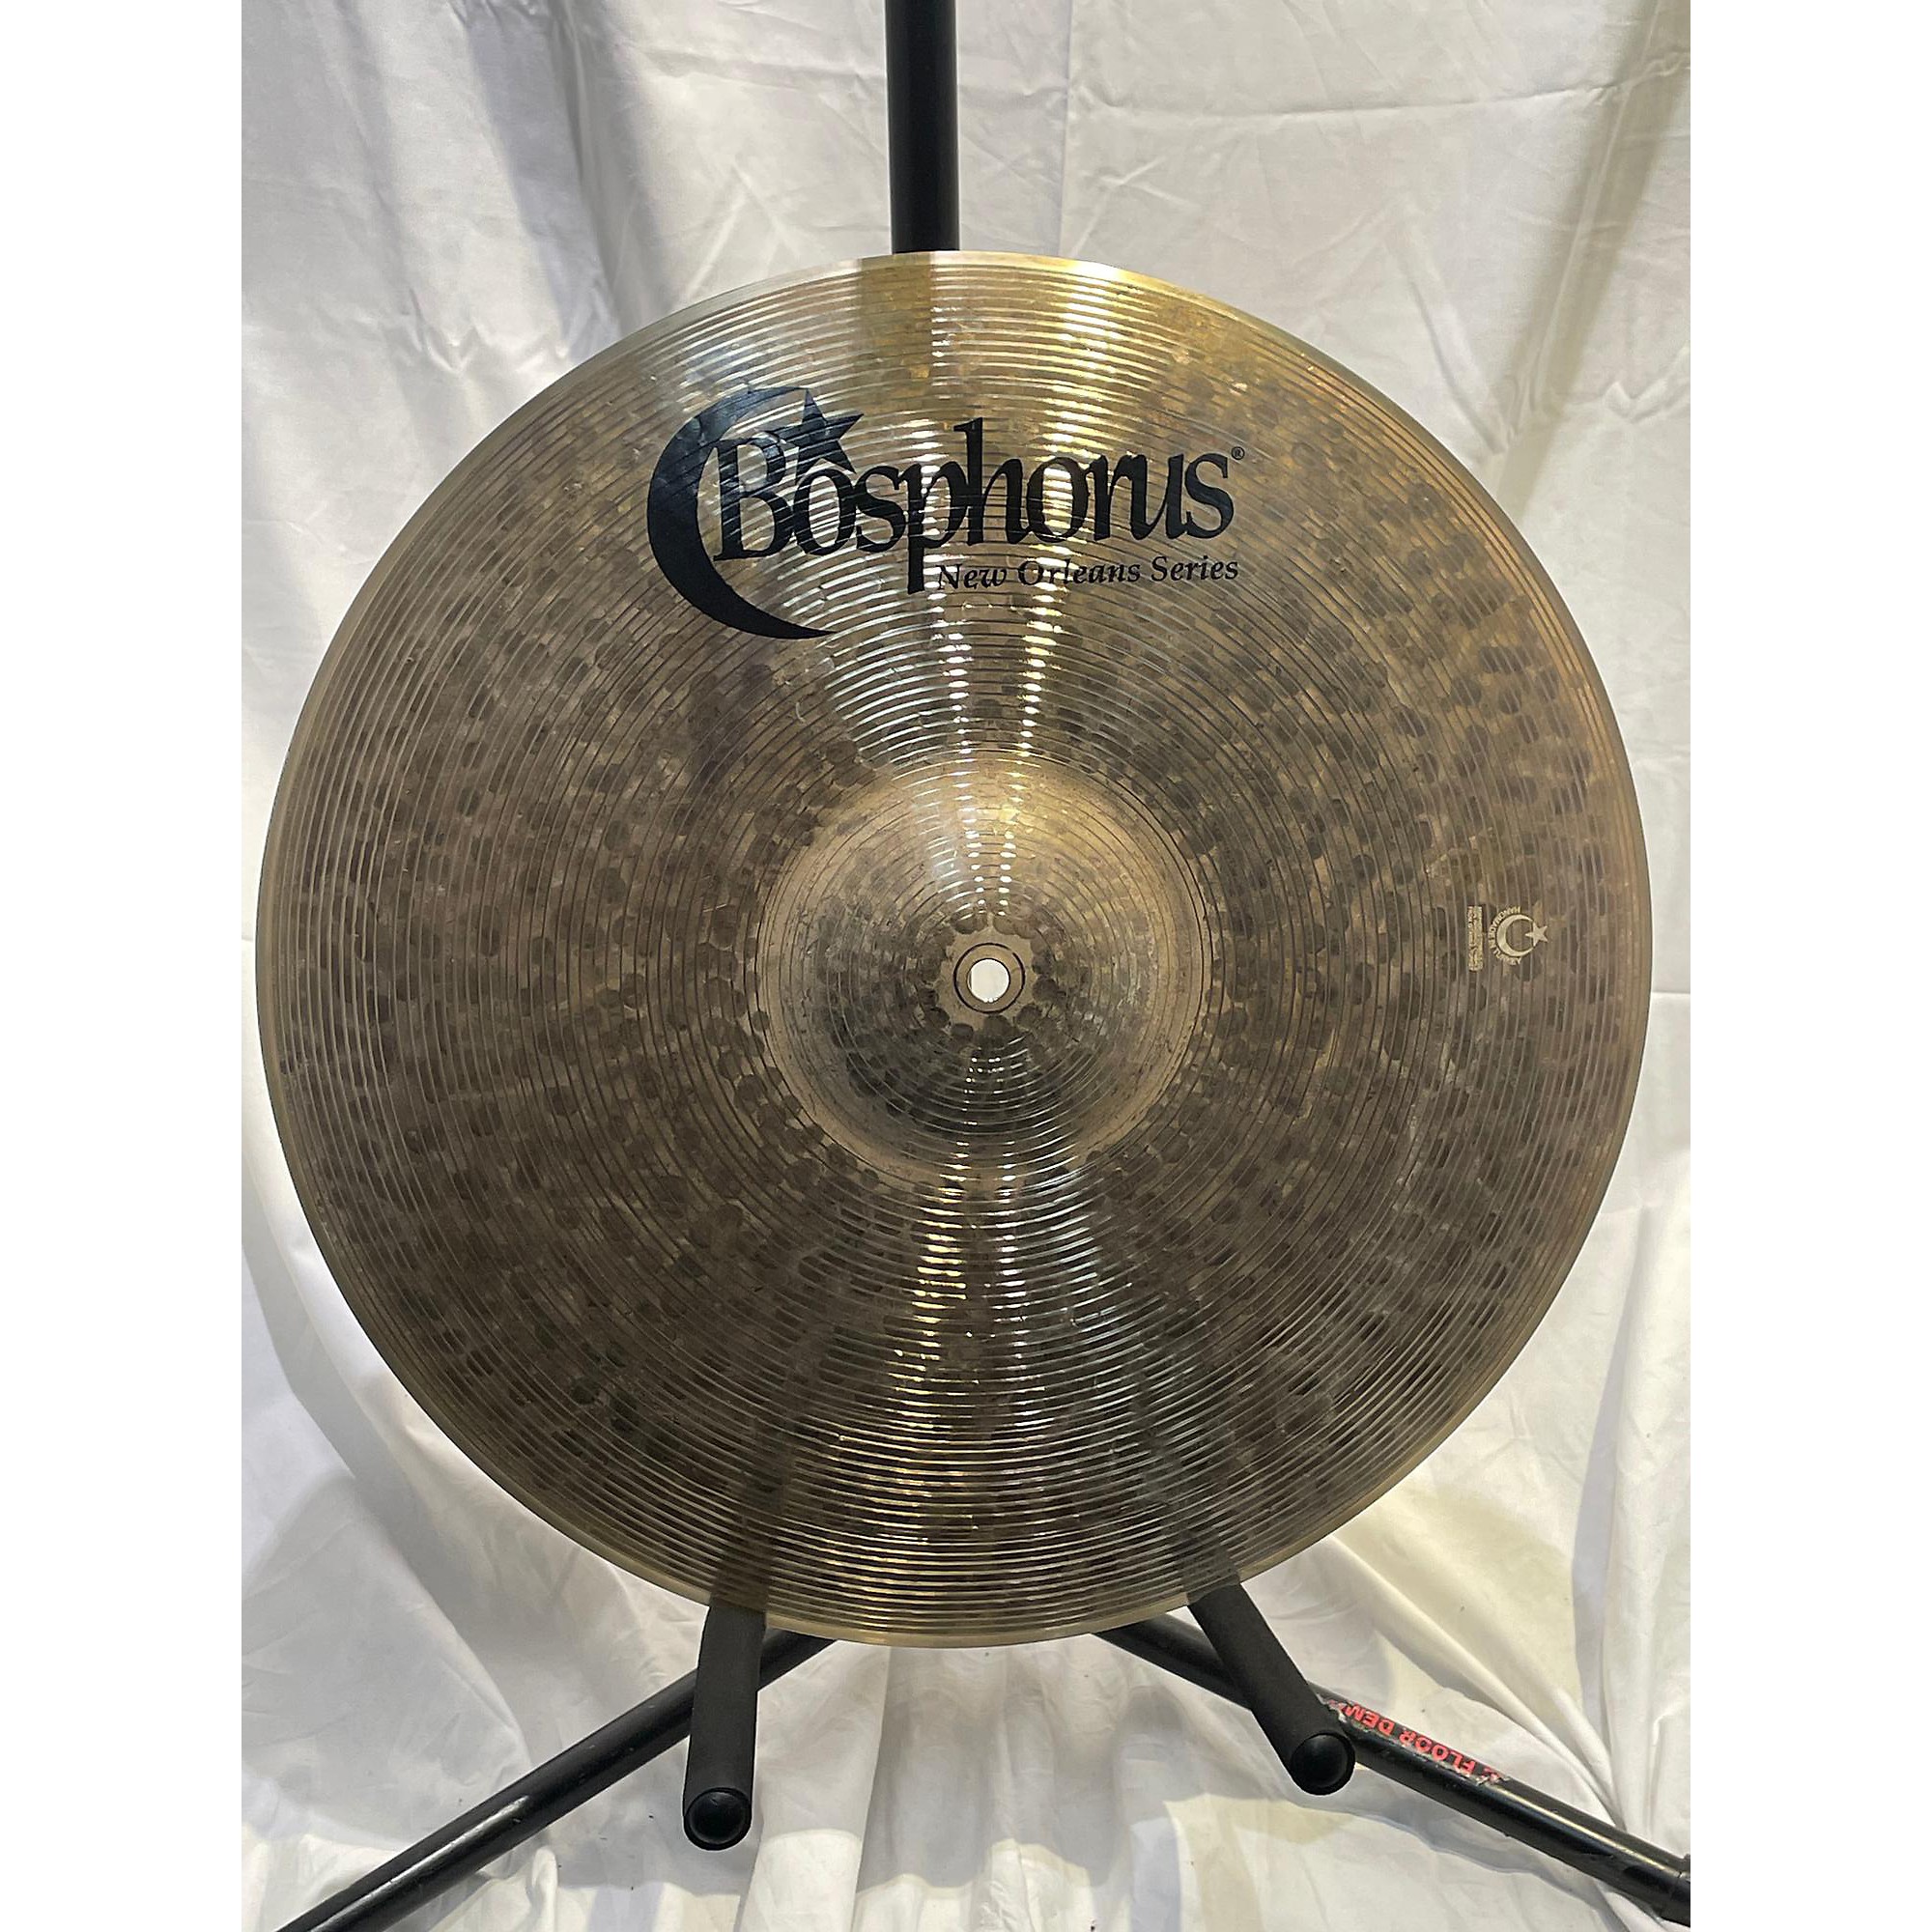 Cymbal　18in　Used　RIDE　HEAVY　Guitar　NEW　Bosphorus　Cymbals　Center　ORLEANS　38